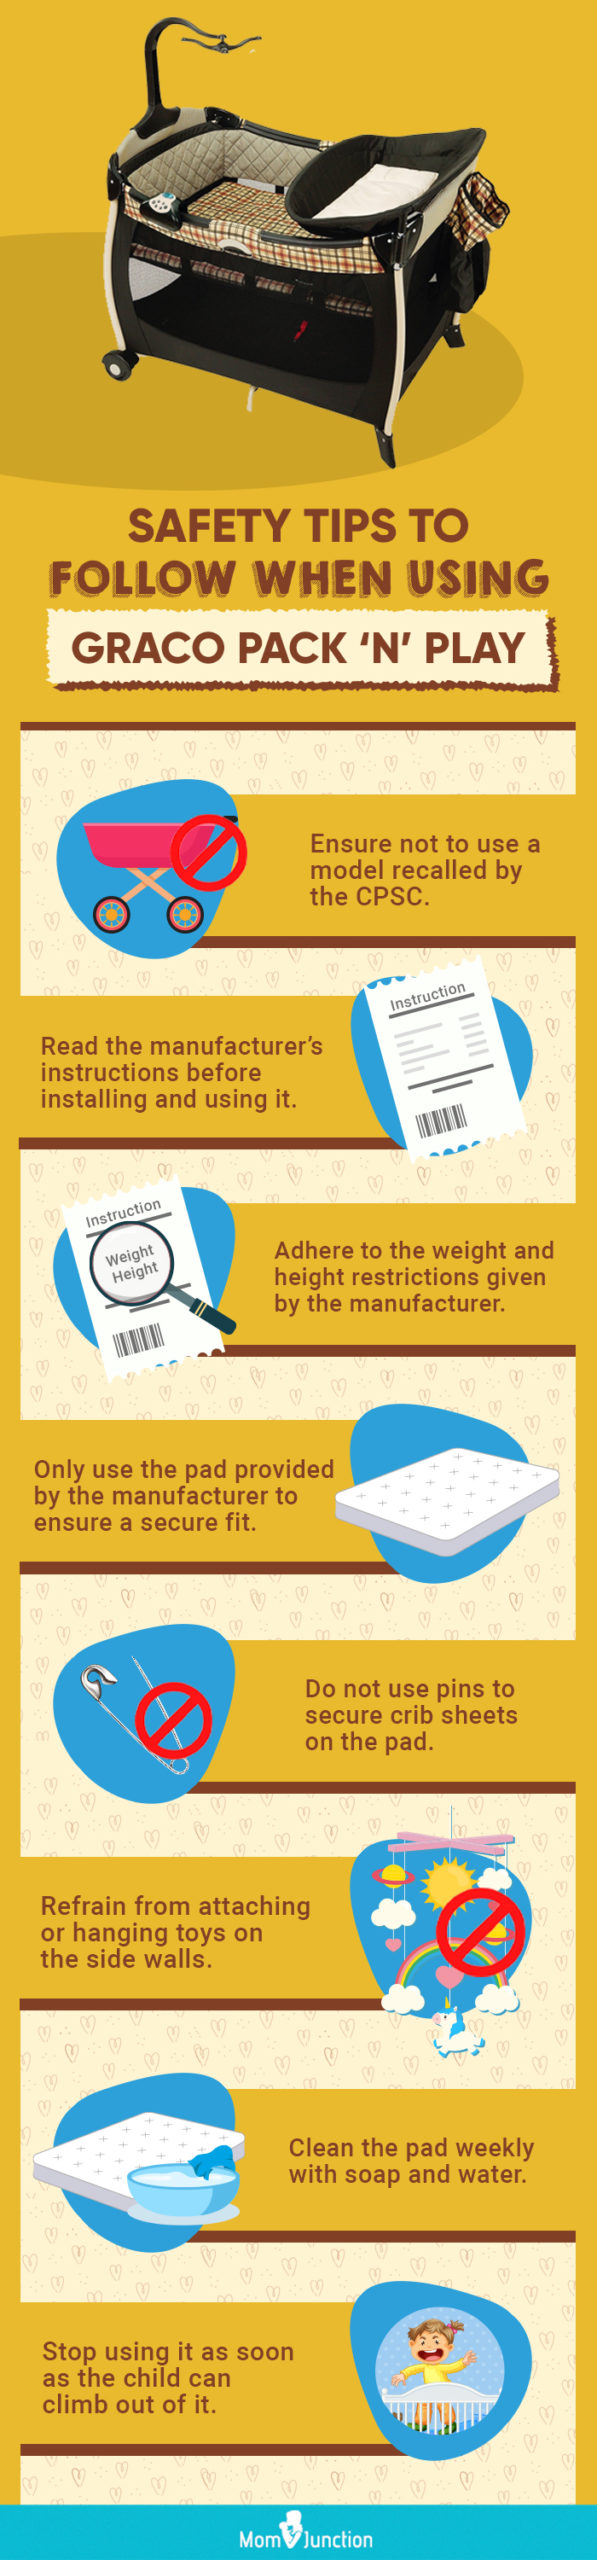 Safety Tips To Follow When Using Graco Pack ‘N’ Play (infographic)